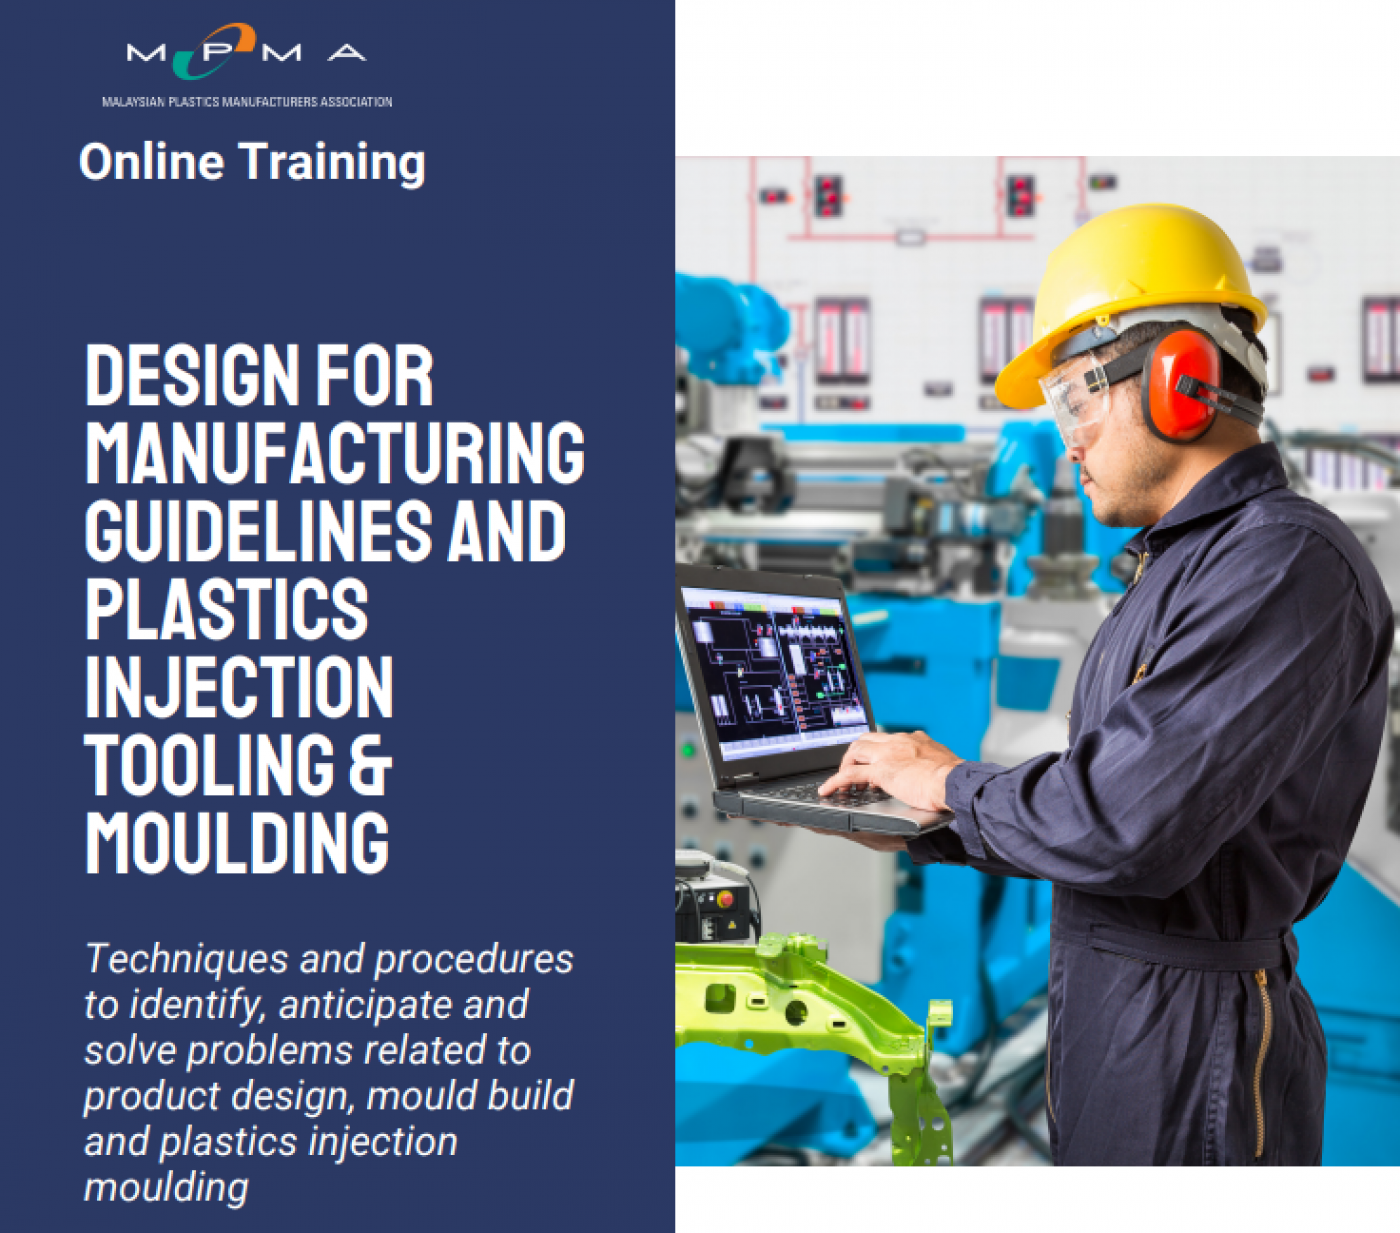 Design for Manufacturing Guidelines and Plastics Injection Tooling & Moulding